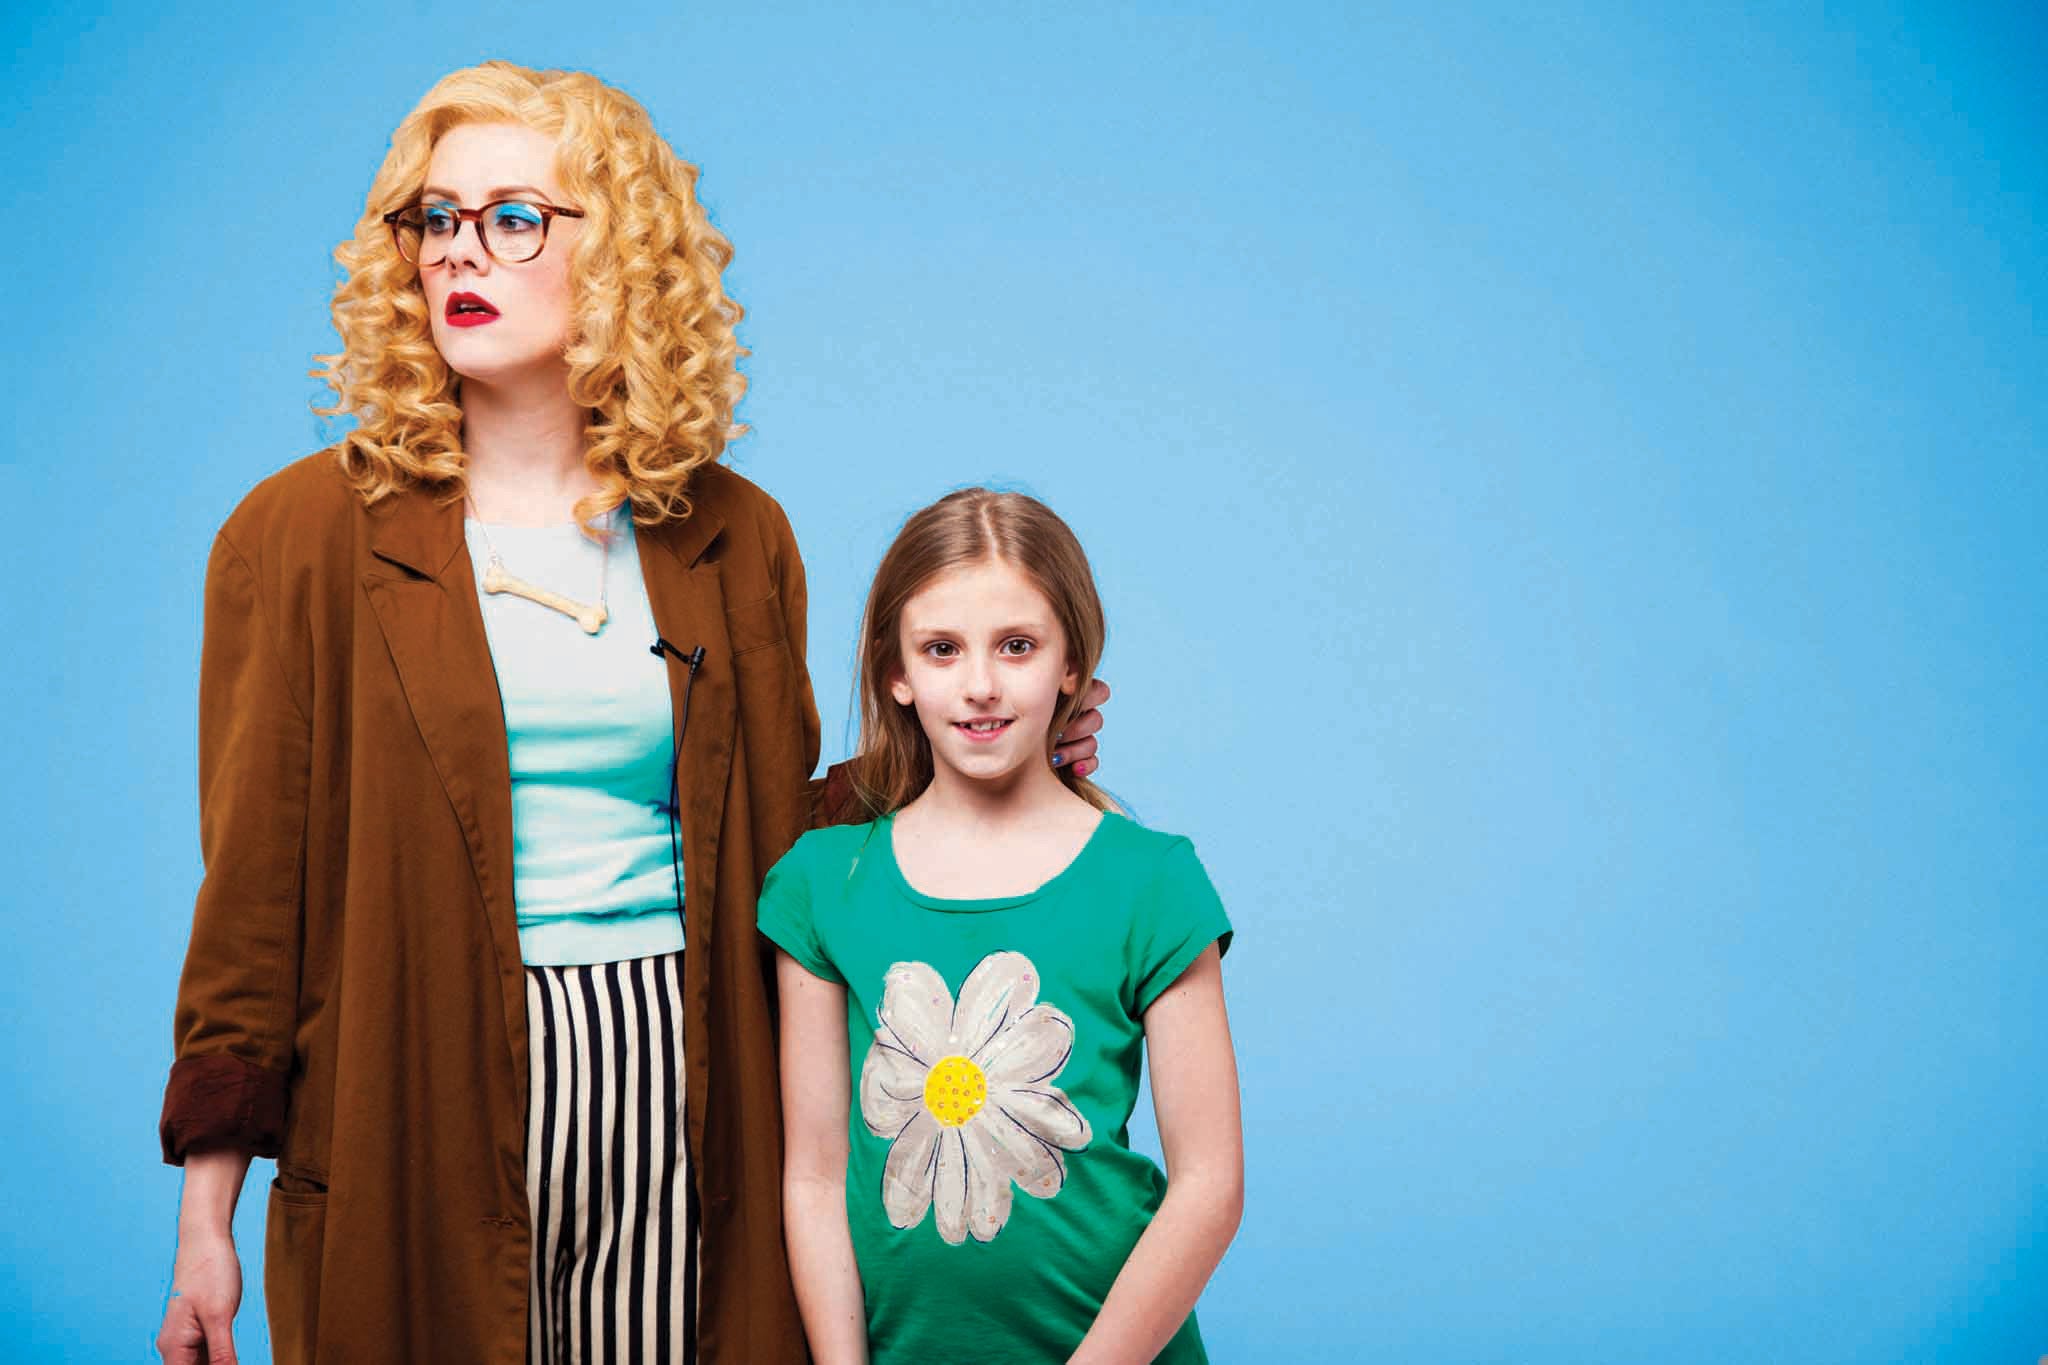 Bryony Kimmings and her niece Taylor in Credible Likeable Superstar Rolemodel